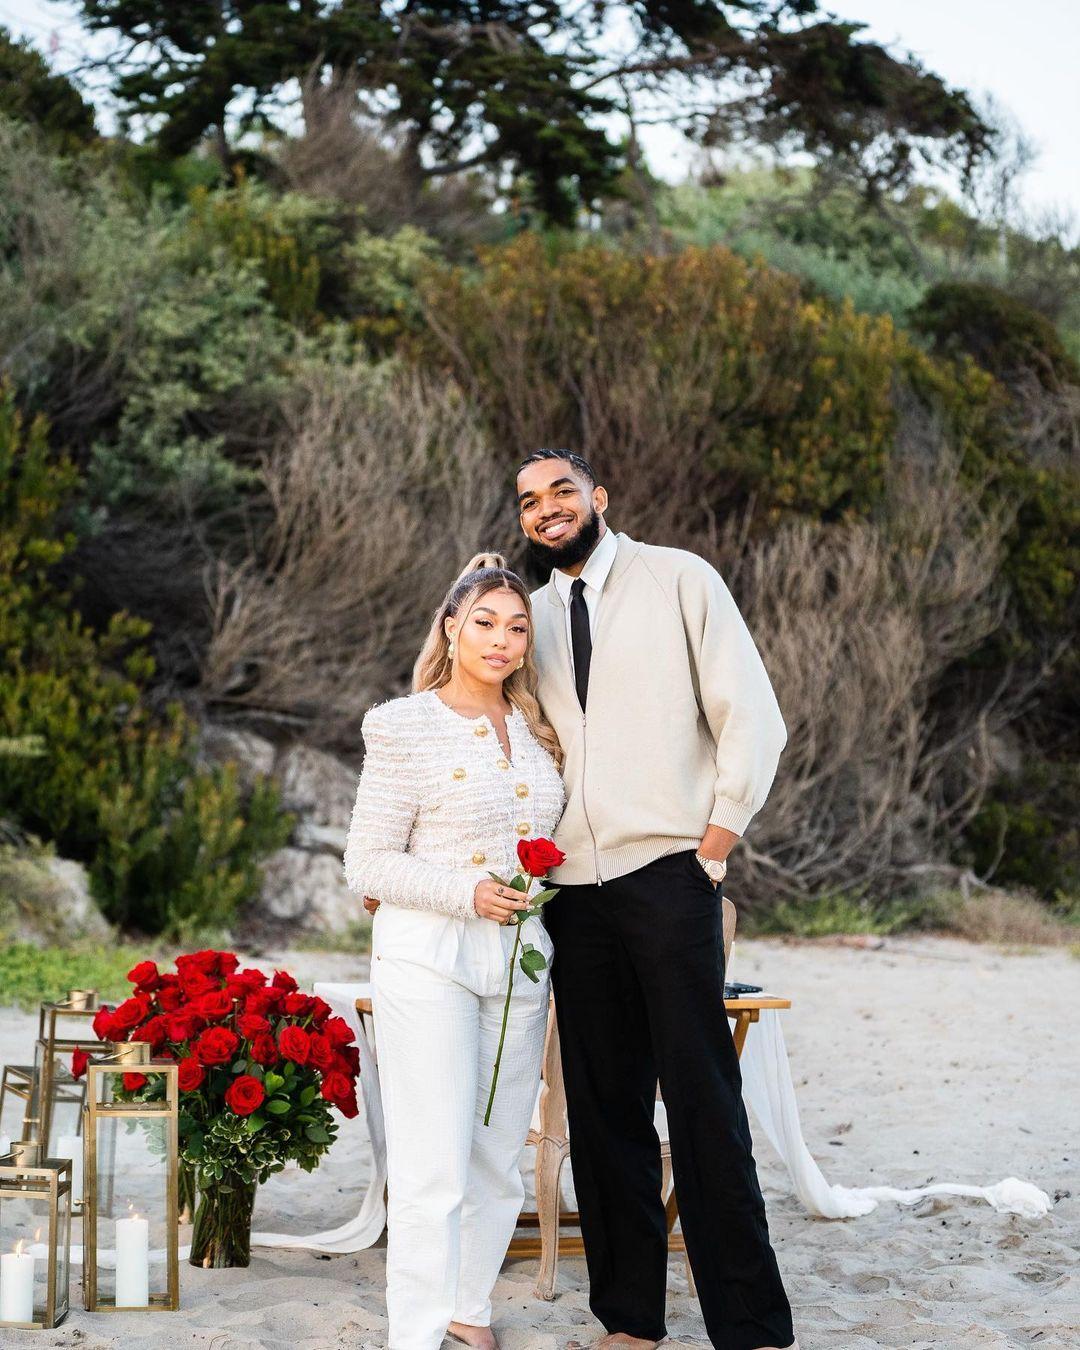 Jordyn Woods and Karl Anthony Towns